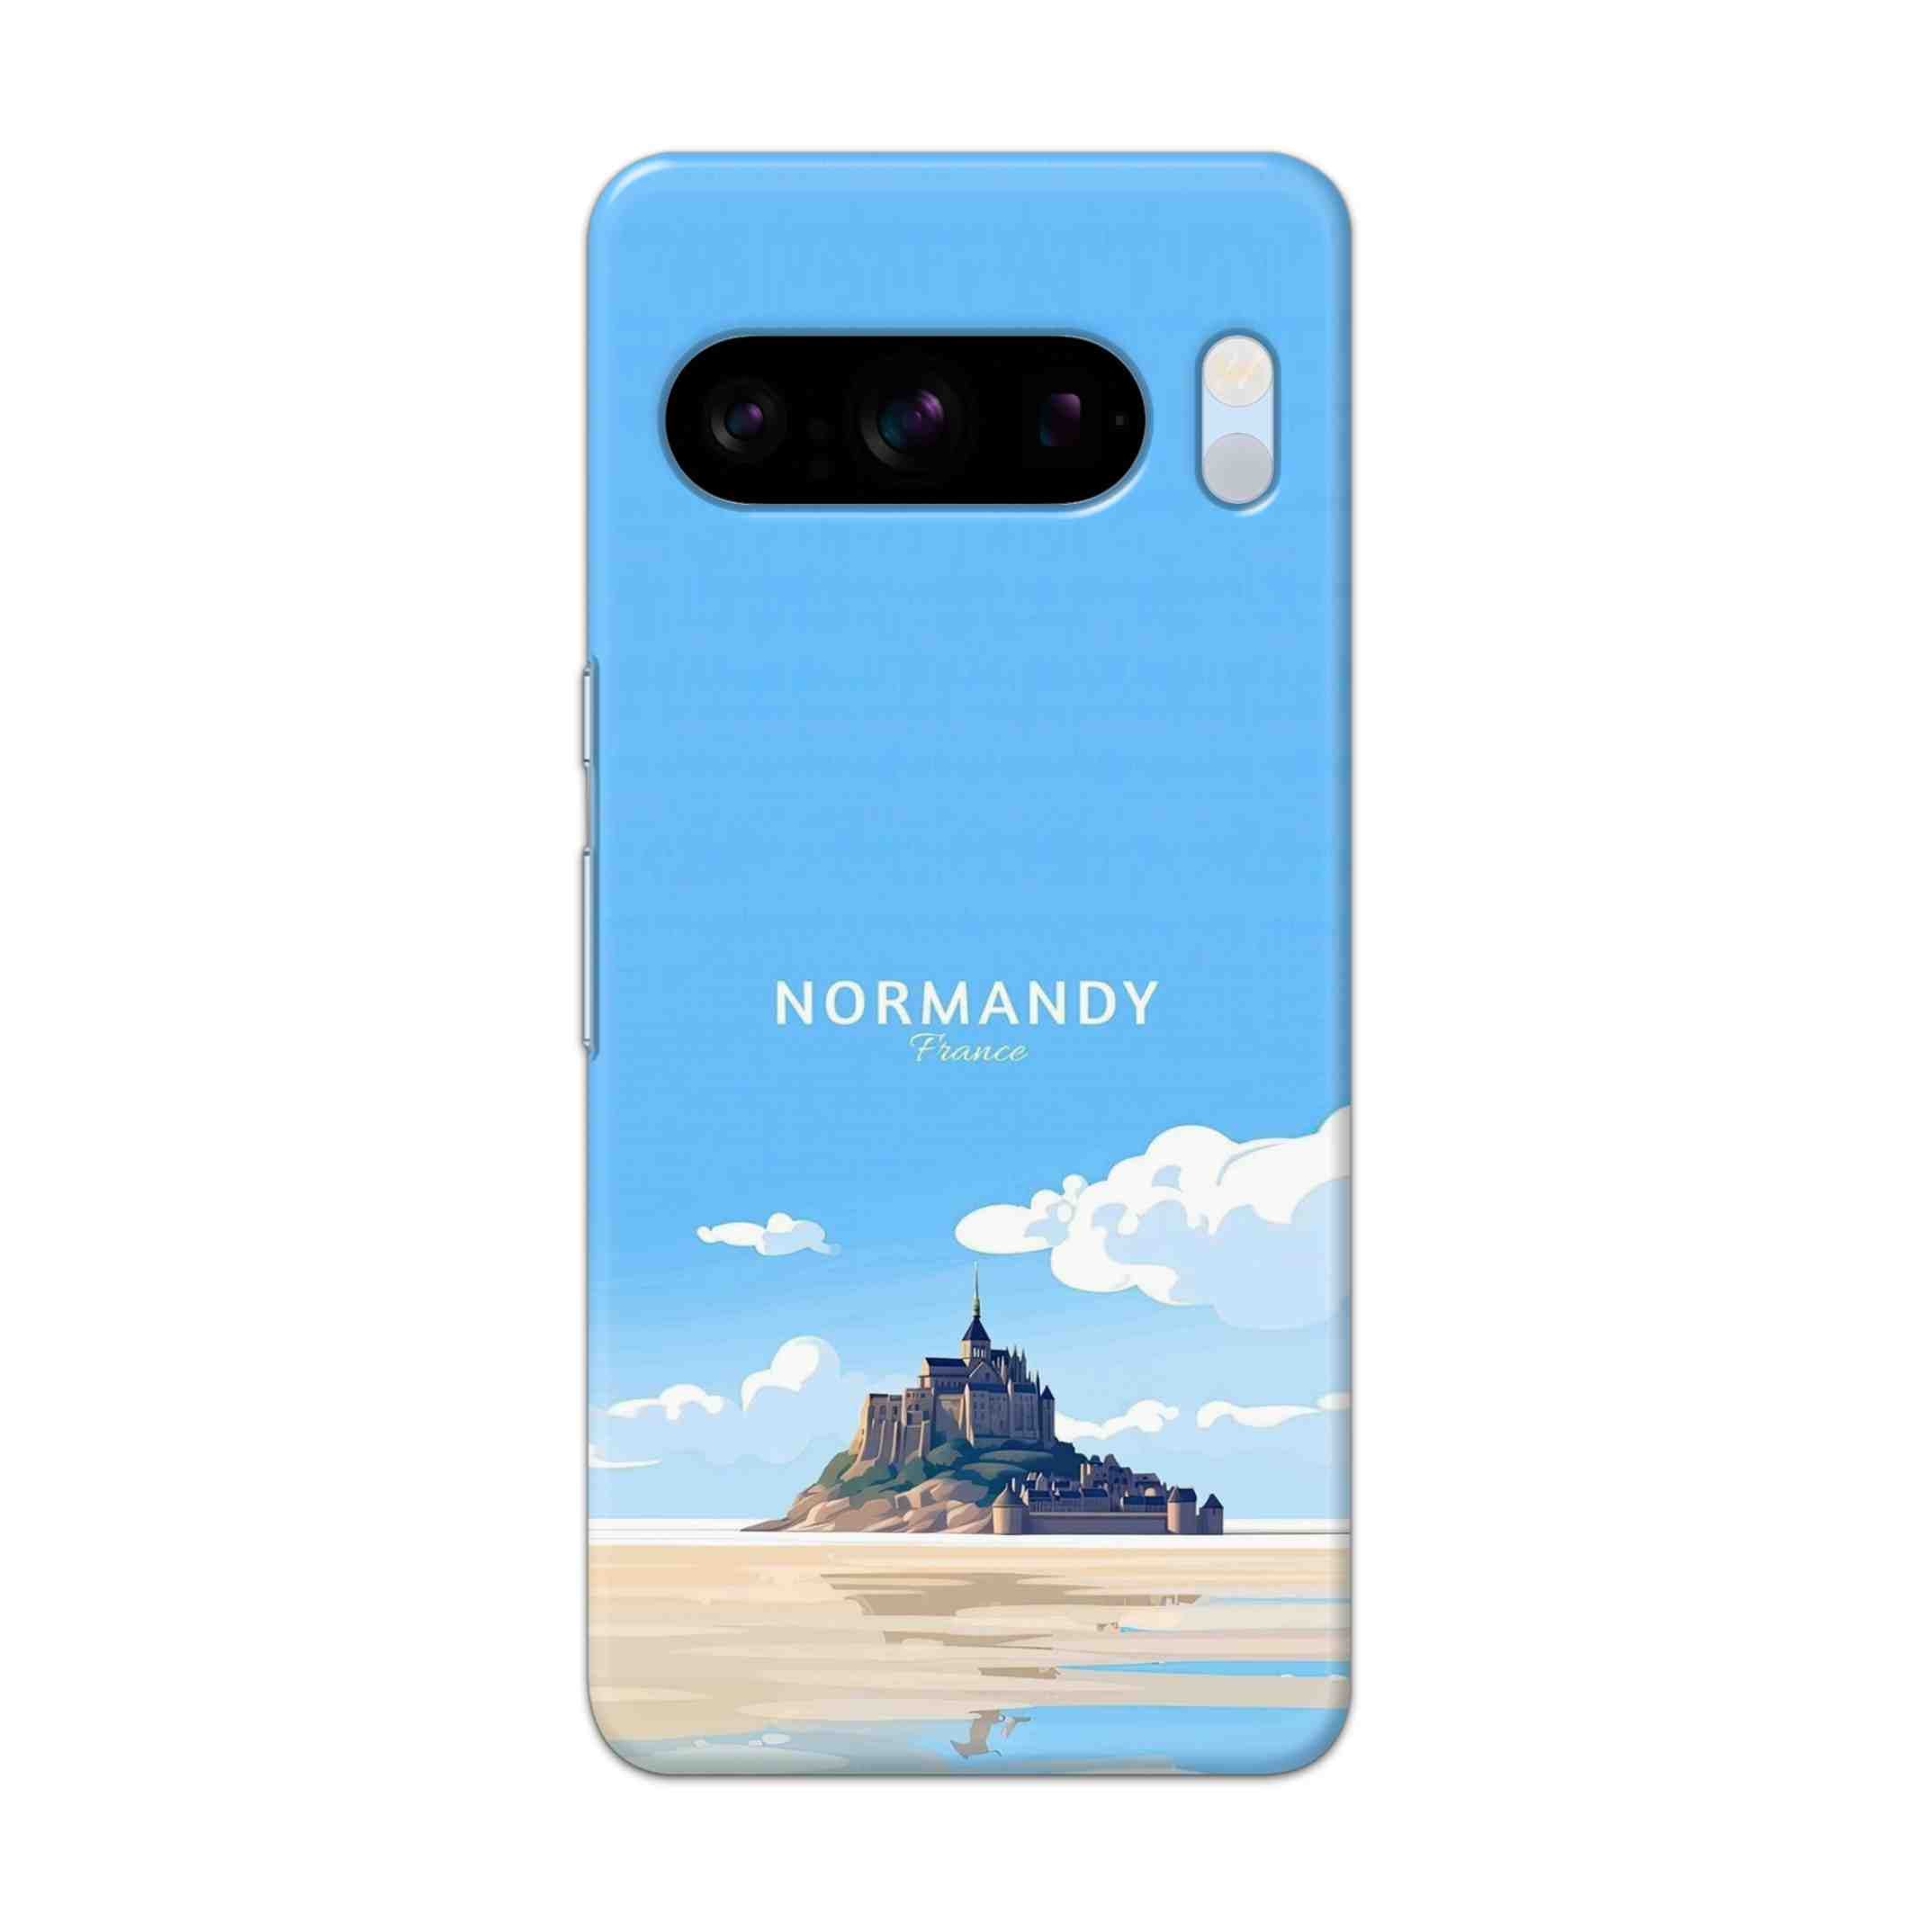 Buy Normandy Hard Back Mobile Phone Case/Cover For Pixel 8 Pro Online